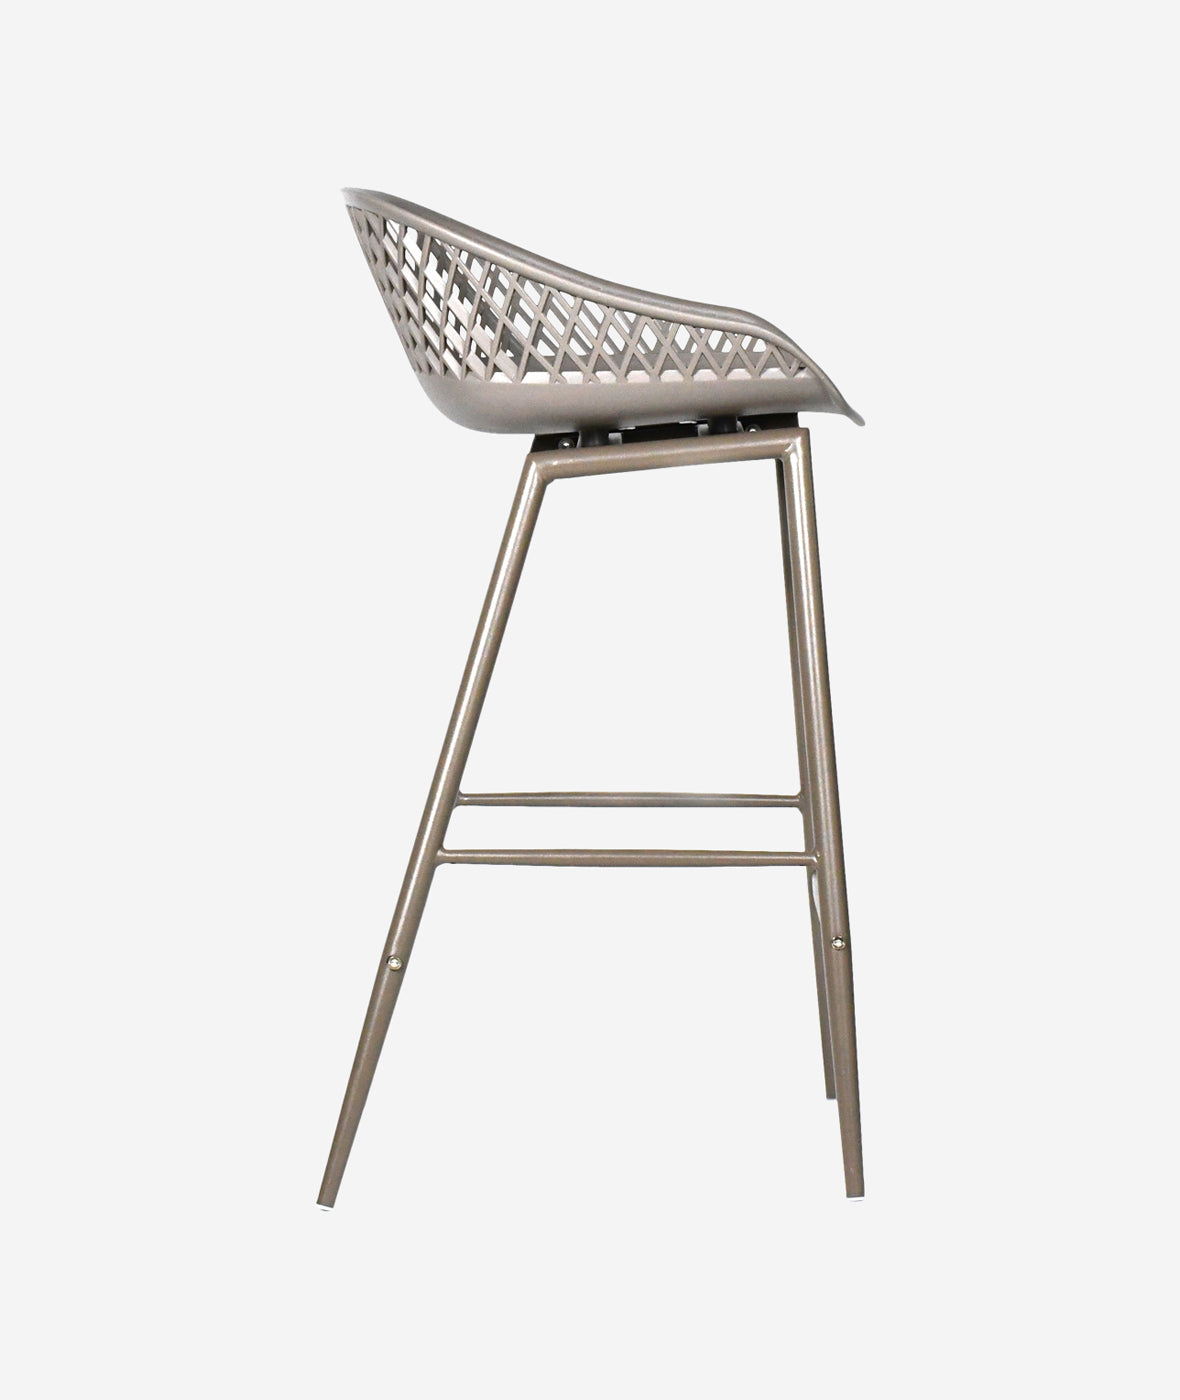 Piazza Outdoor Counter Stool - More Options